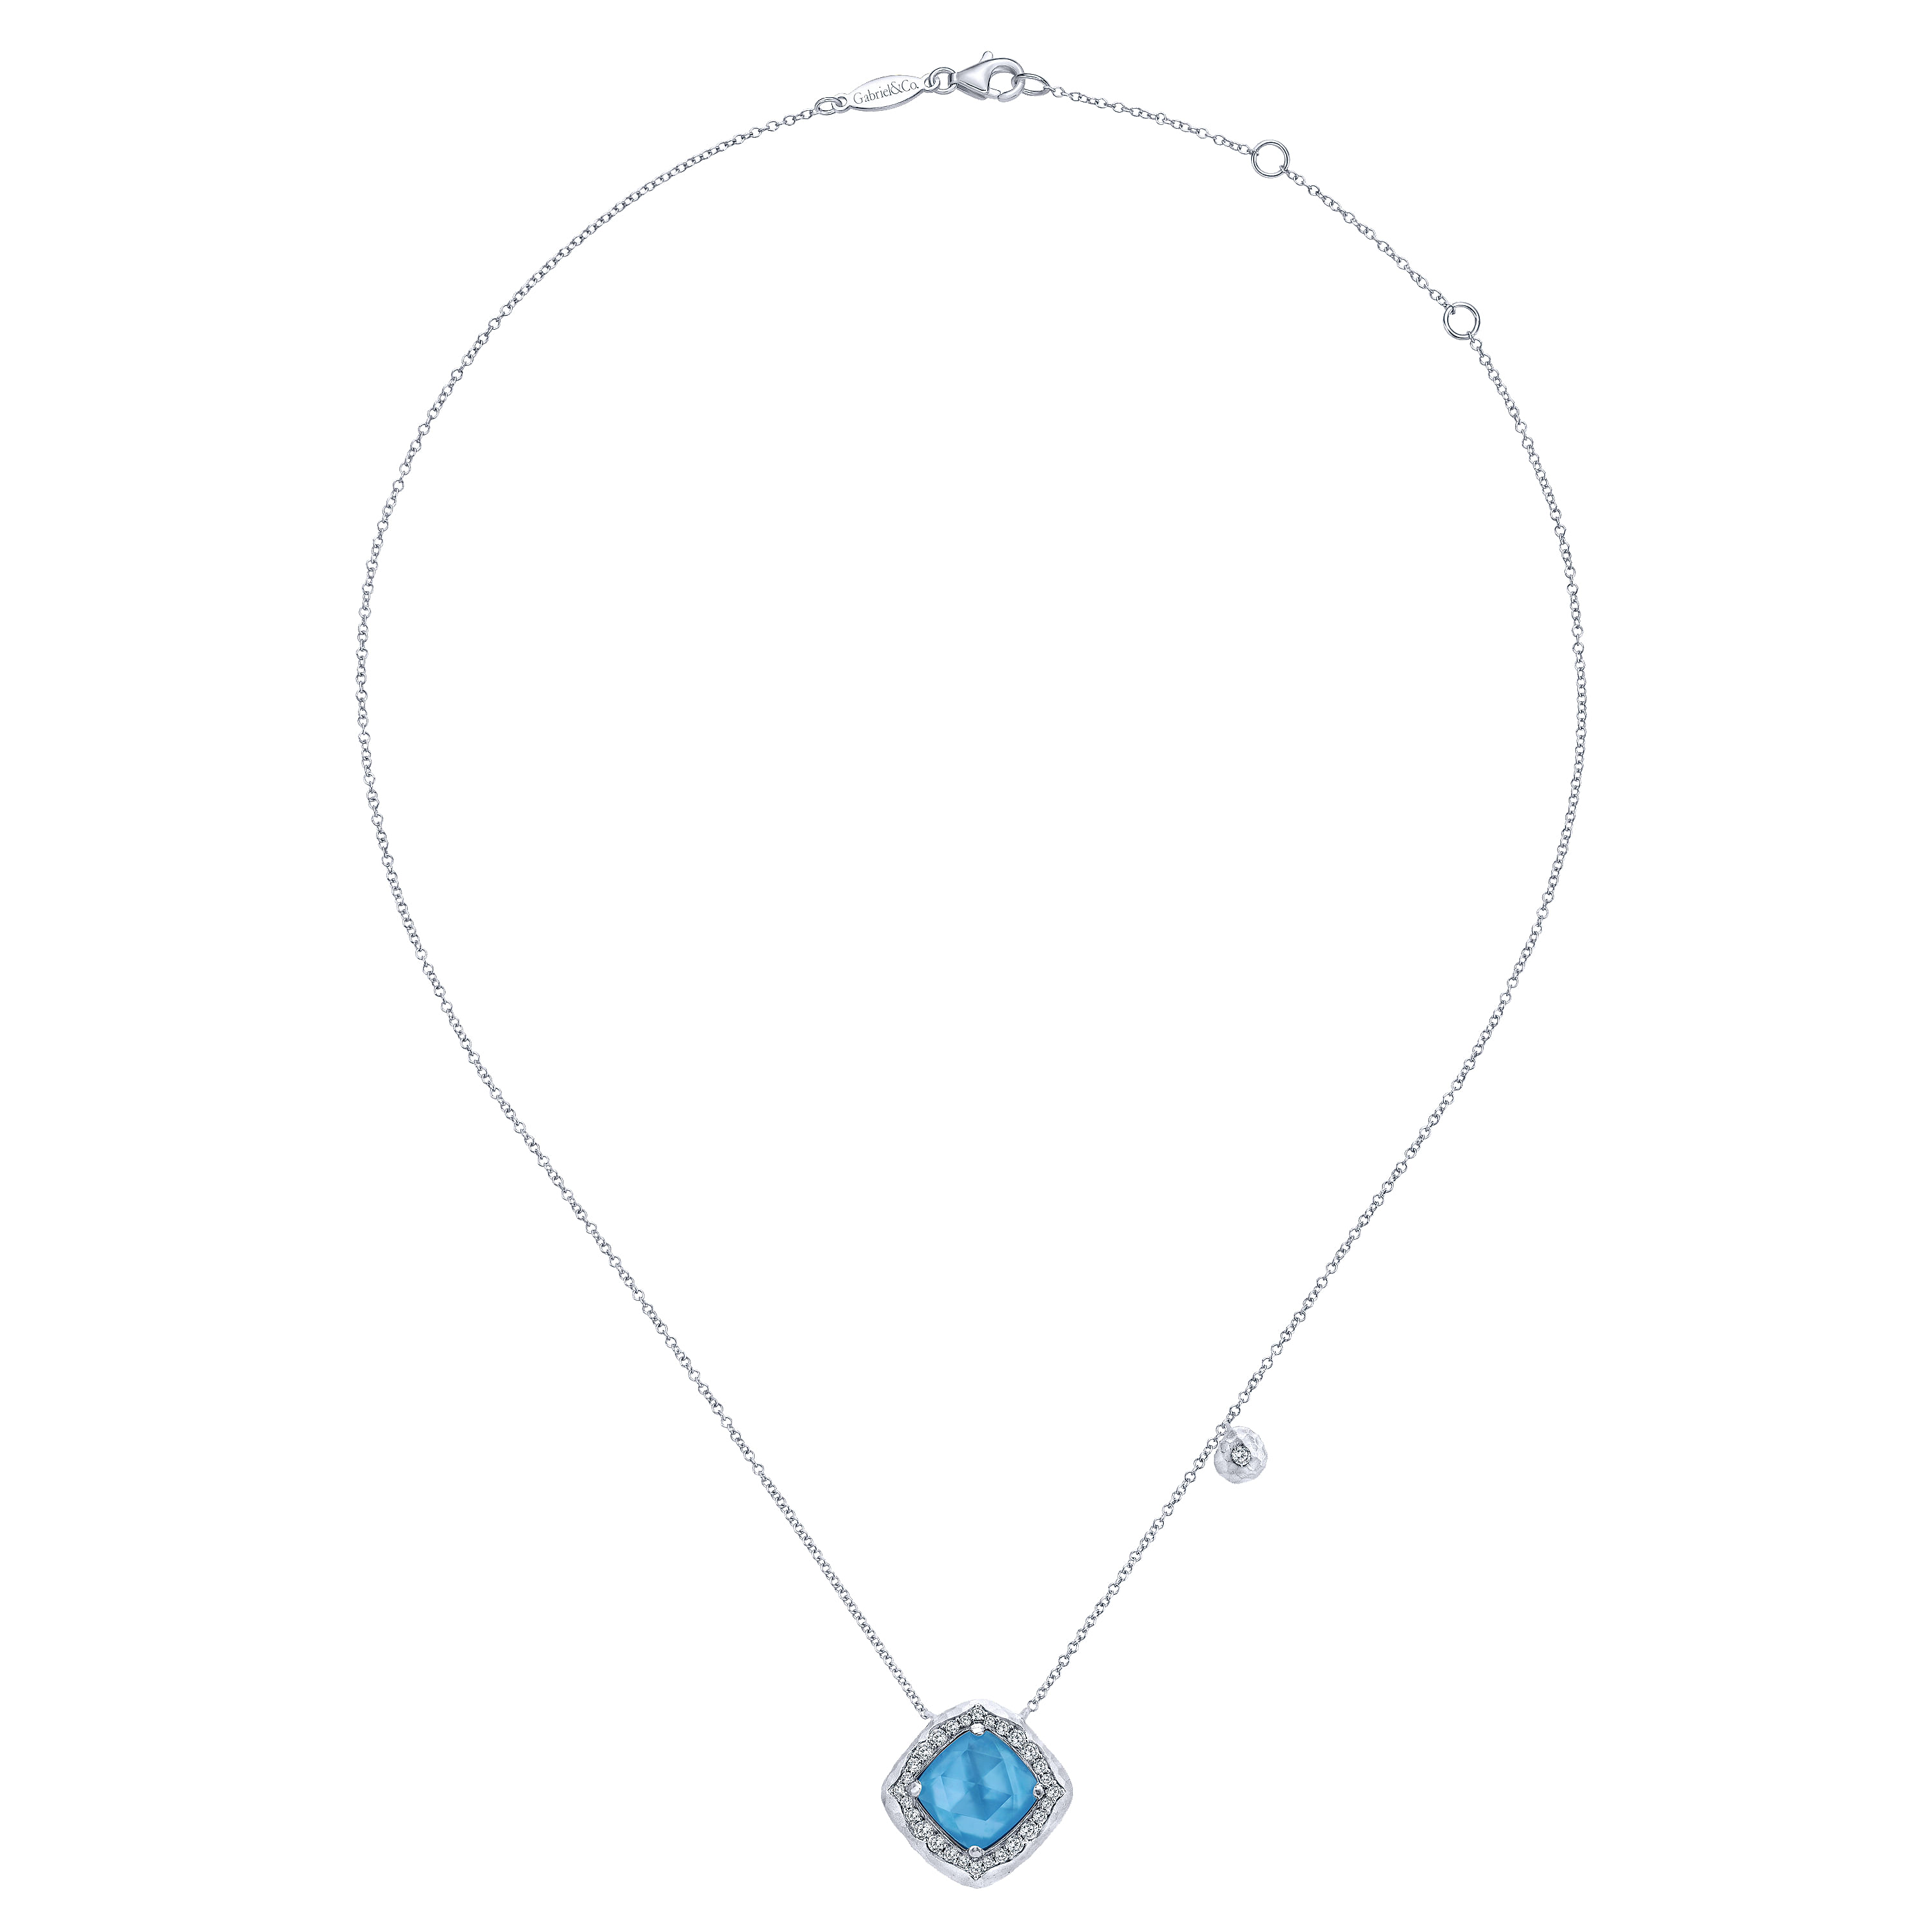 925 Sterling Silver Hammered Rock Crystal/White MOP/Turquoise and White Sapphire Pendant Necklace